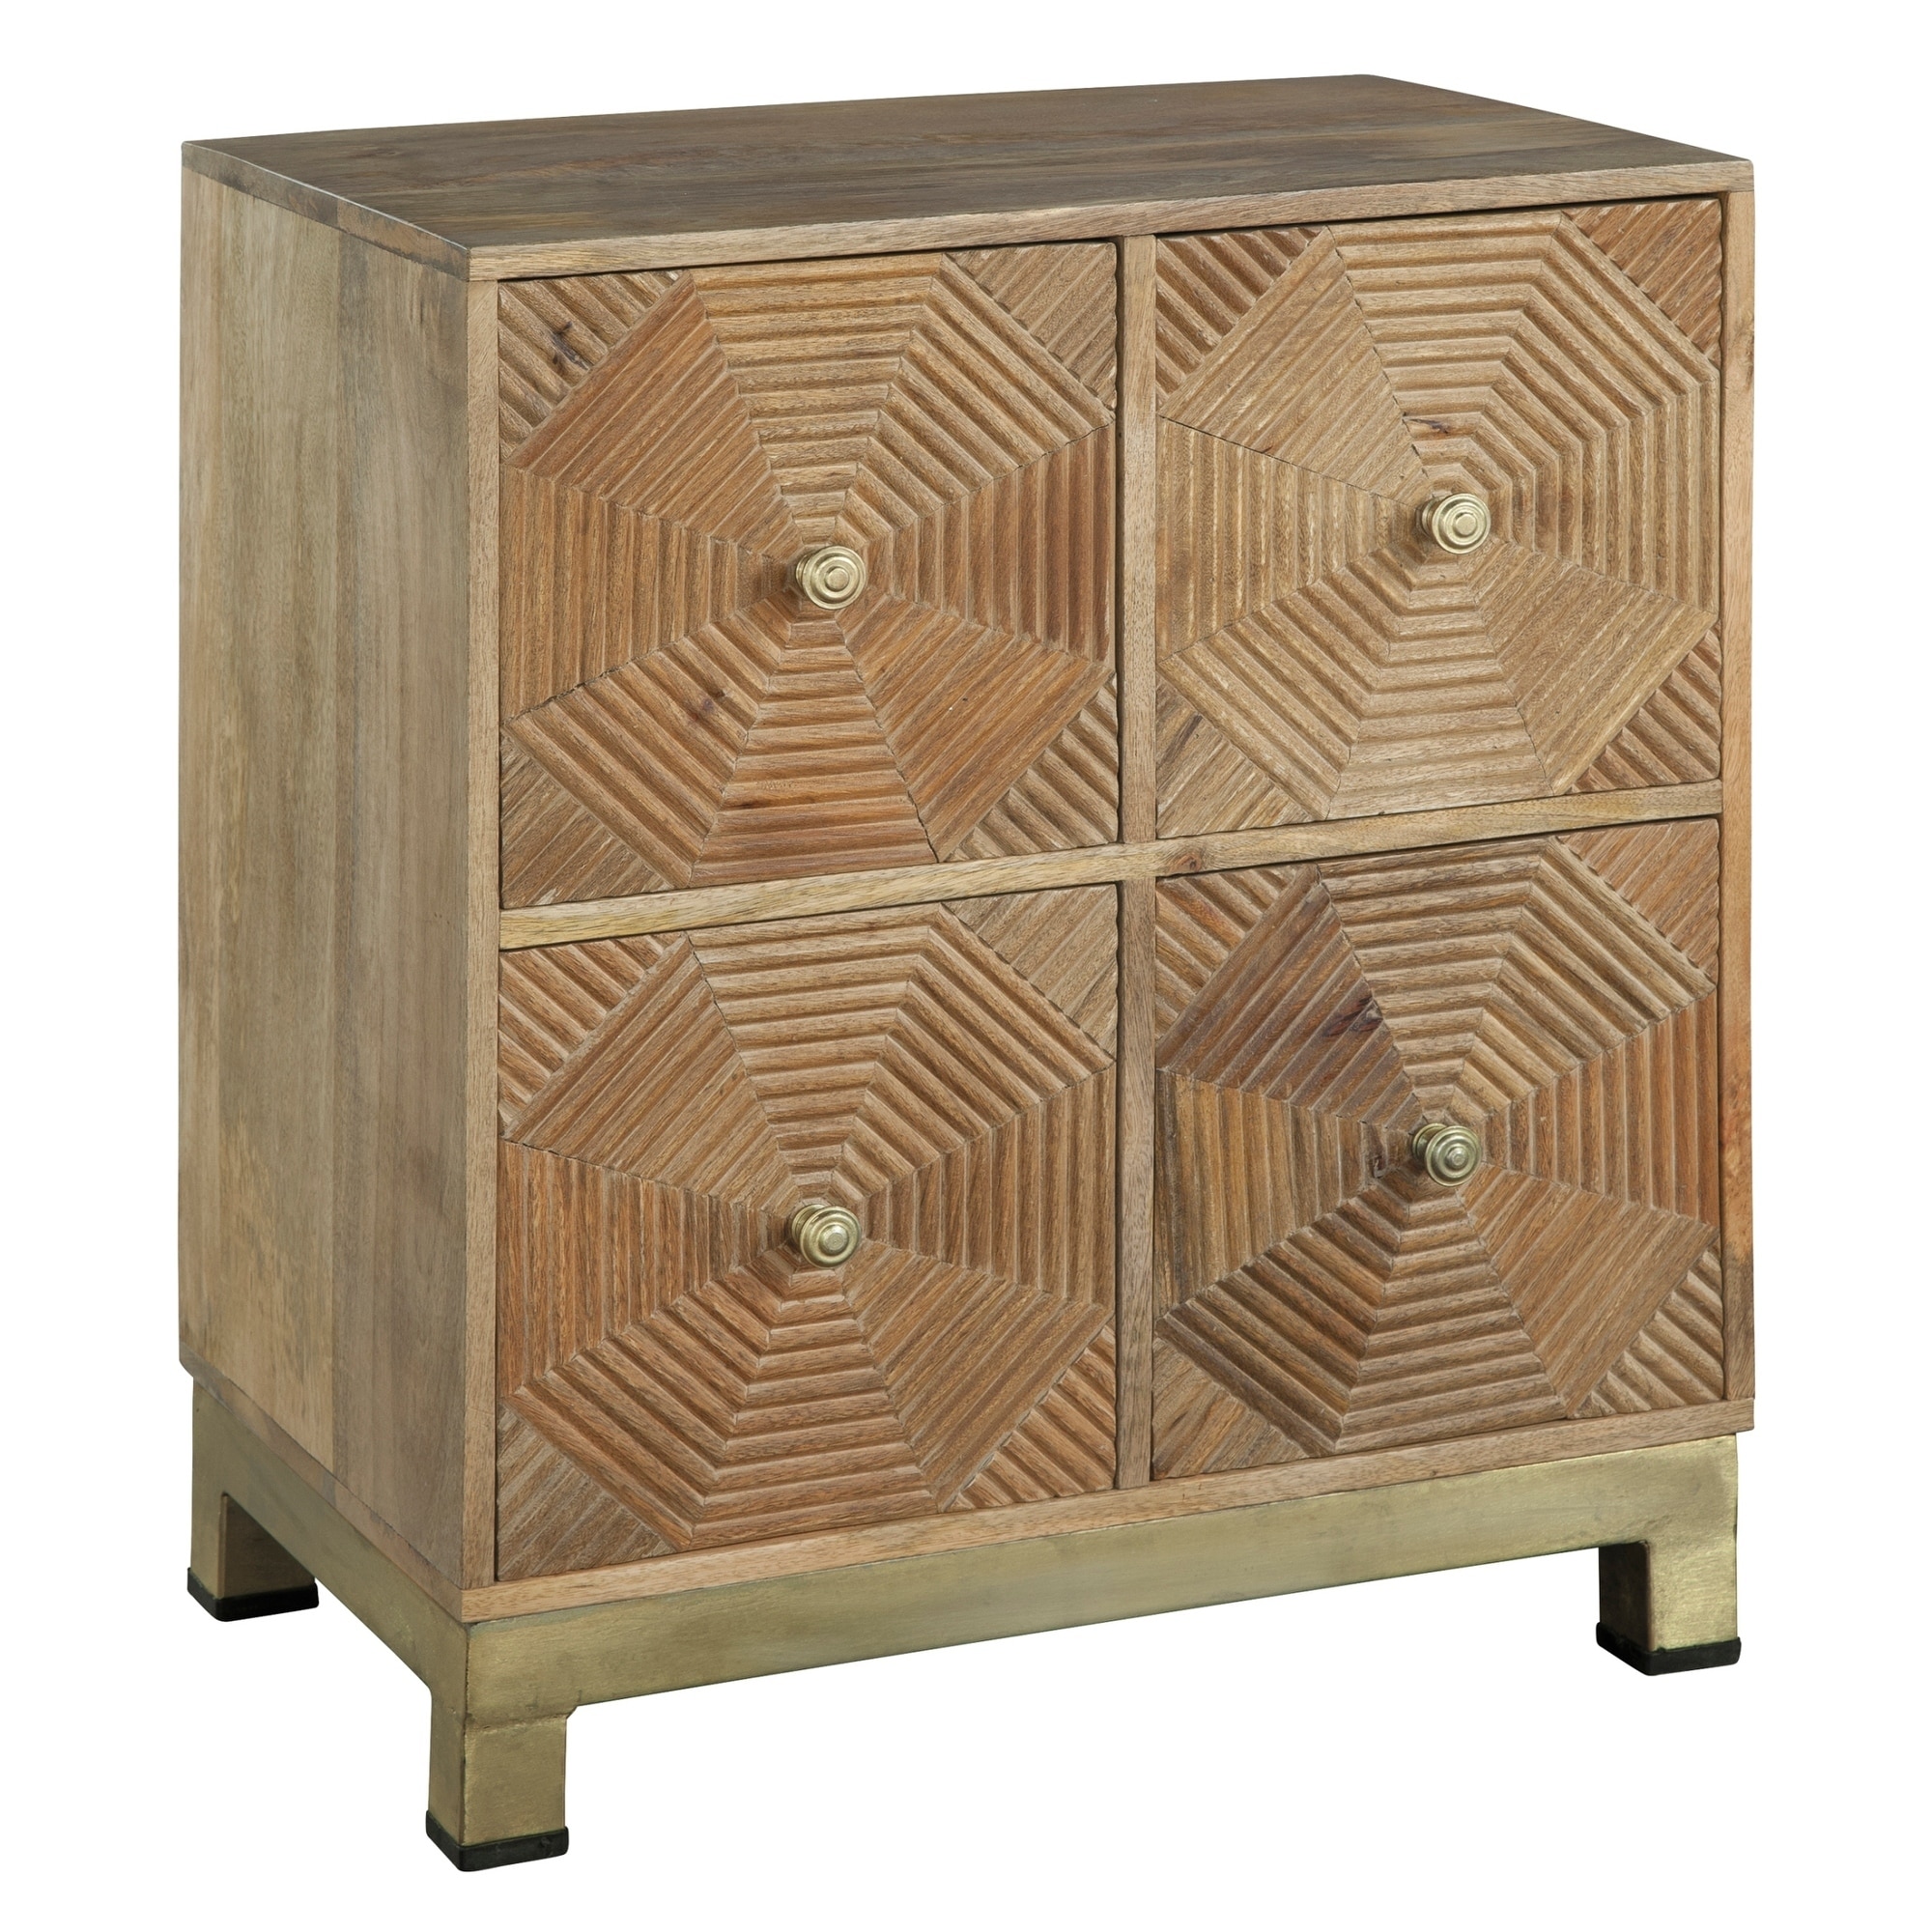 Shop Hekman Accents Contemporary Modern Eclectic Glam Geometric